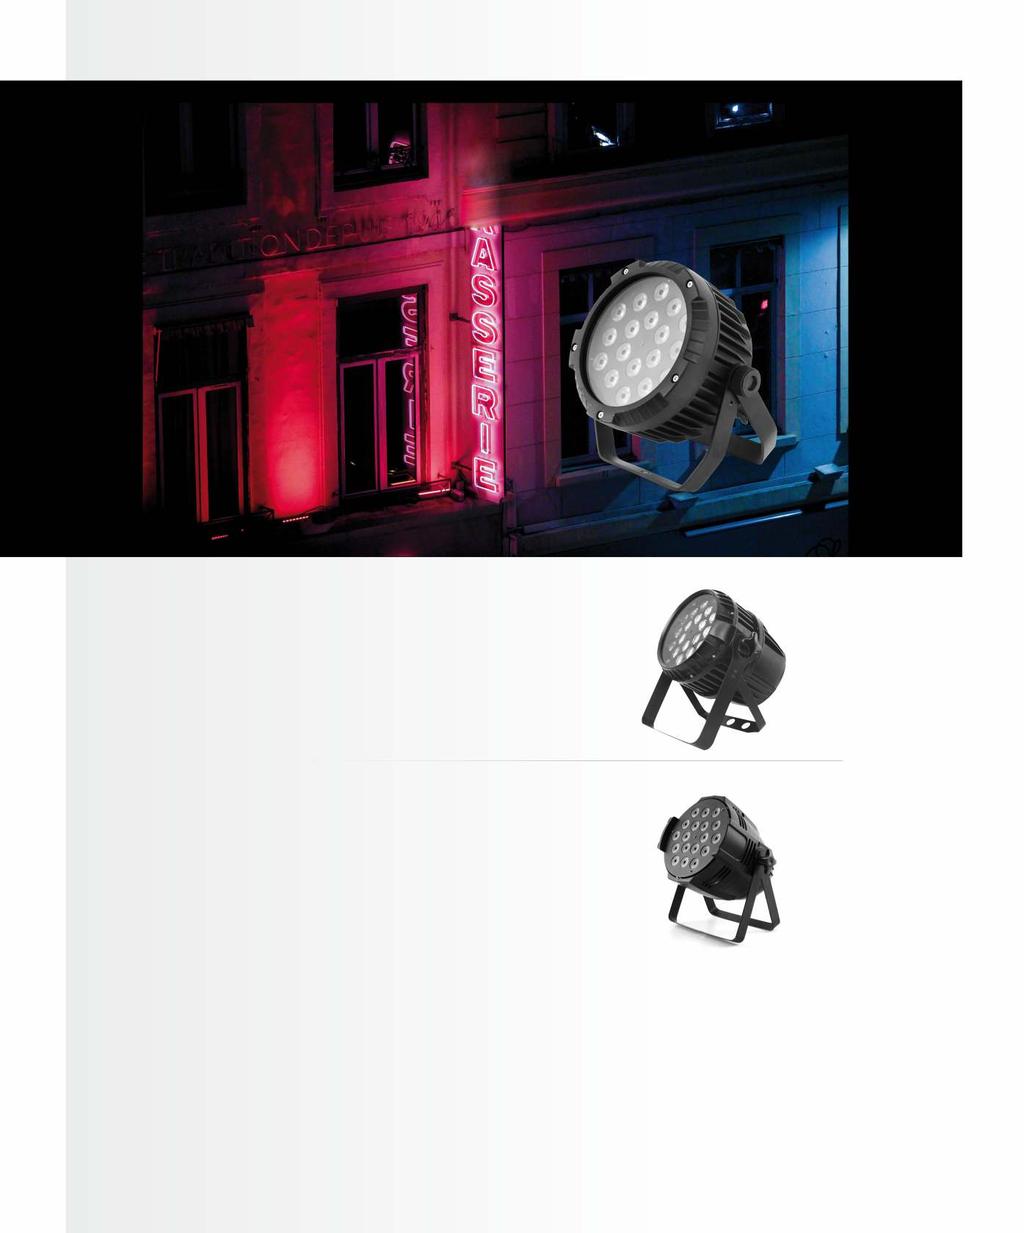 LED PAR 64 IP65 ver.ii 18x10W RGBW 4in1 [F7100310] Designed for outdoor use, for example to illuminate the facades of buildings. It can display sta c colors or change the colors in automa c mode.